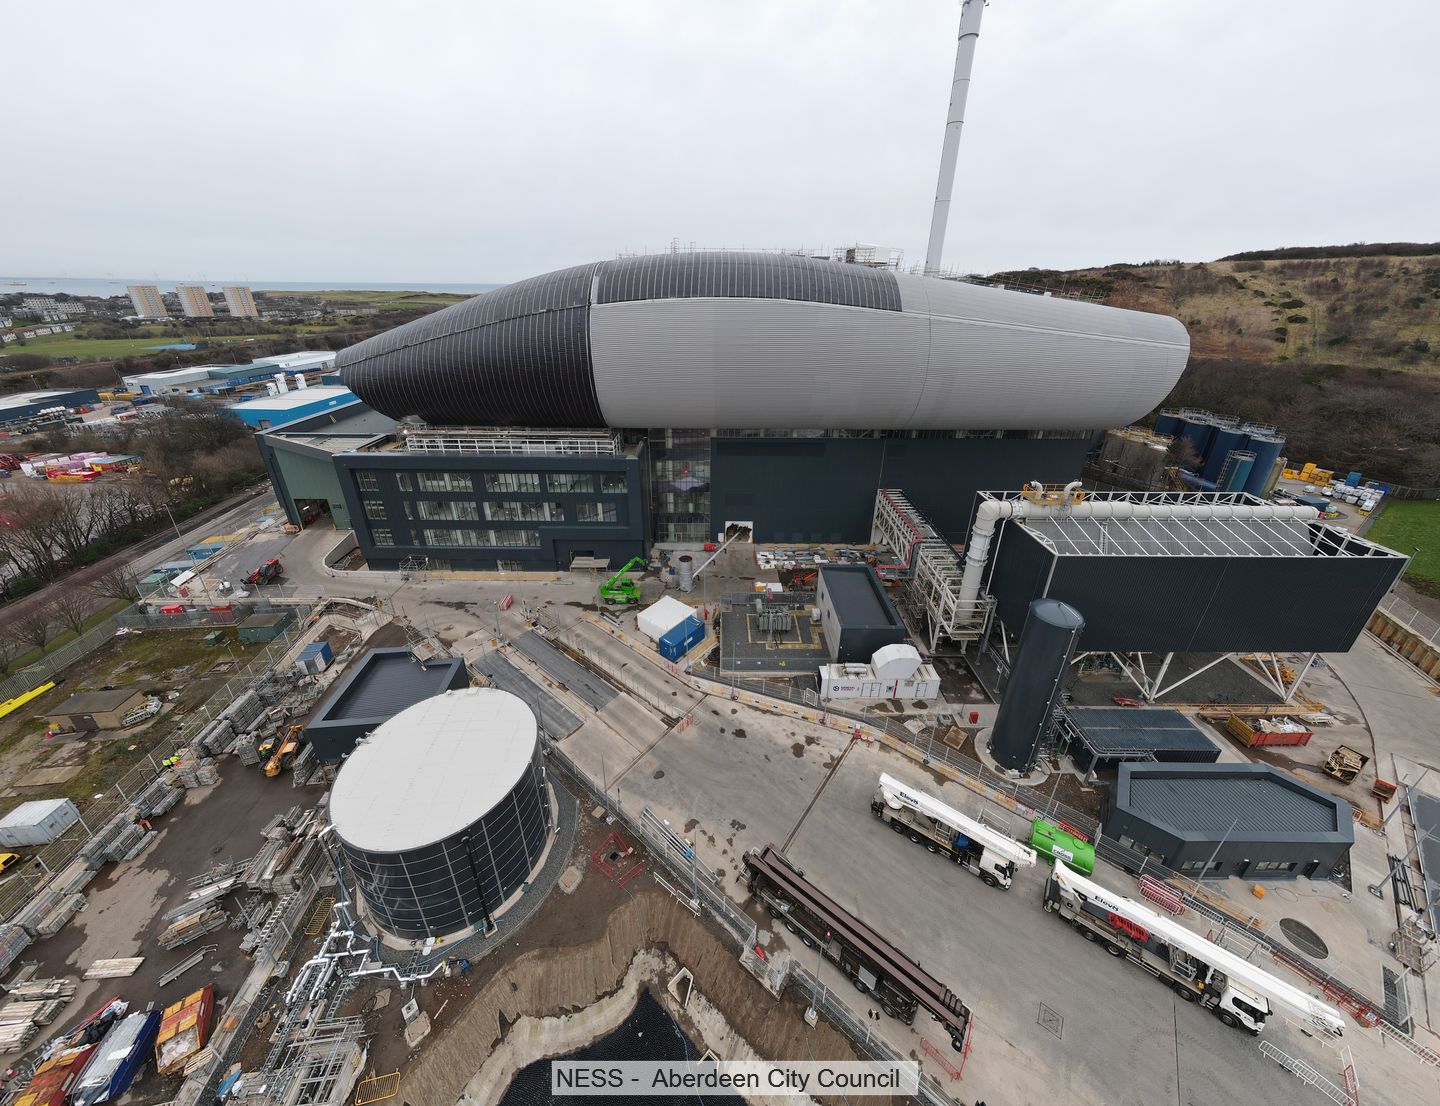 Photo of the NESS waste to energy plant in Aberdeen Scottland in early 2023